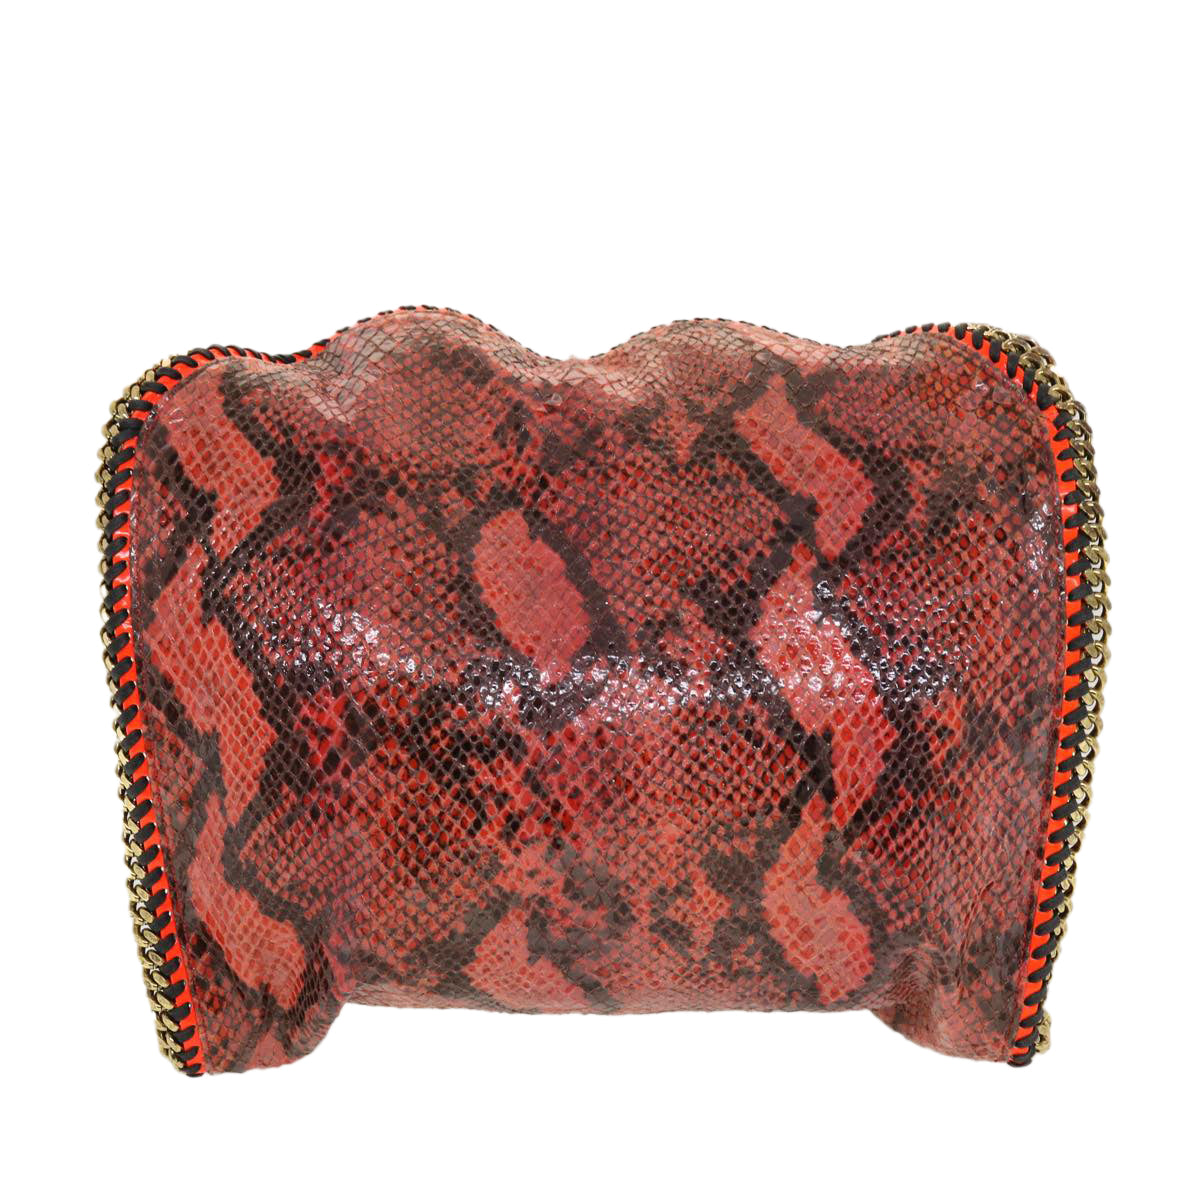 Stella MacCartney Python Chain Shoulder Bag Leather Red Auth am4359